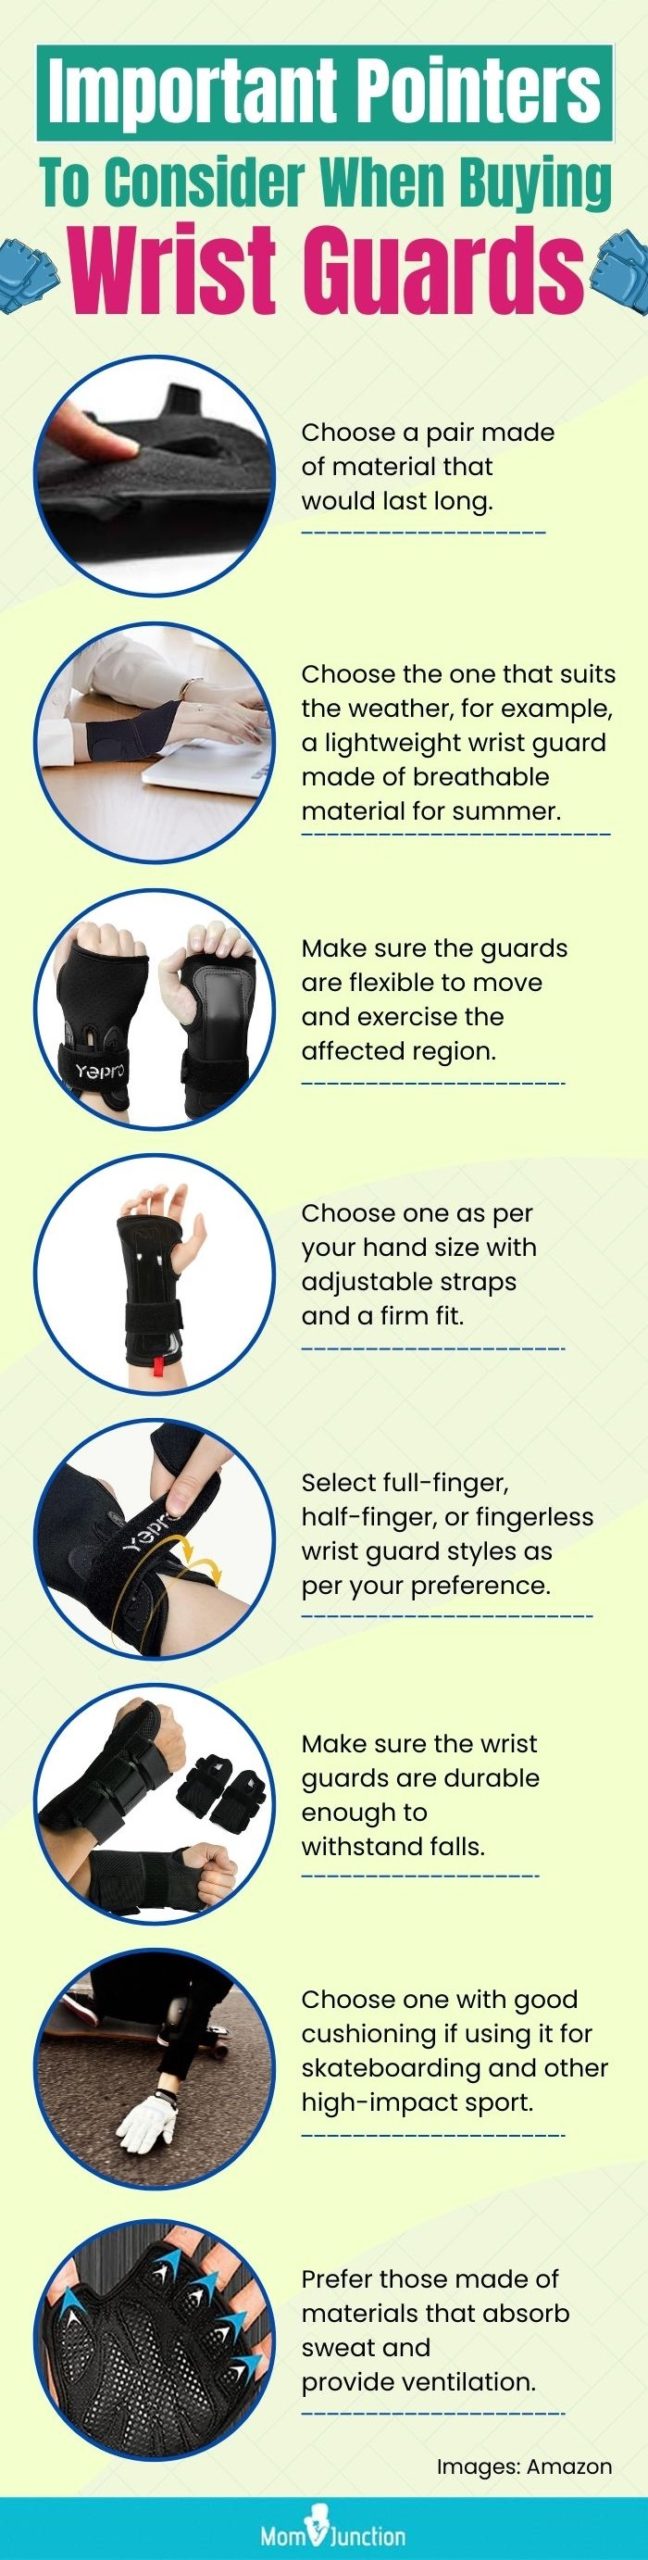 Important Pointers To Consider When Buying Wrist Guards(infographic)